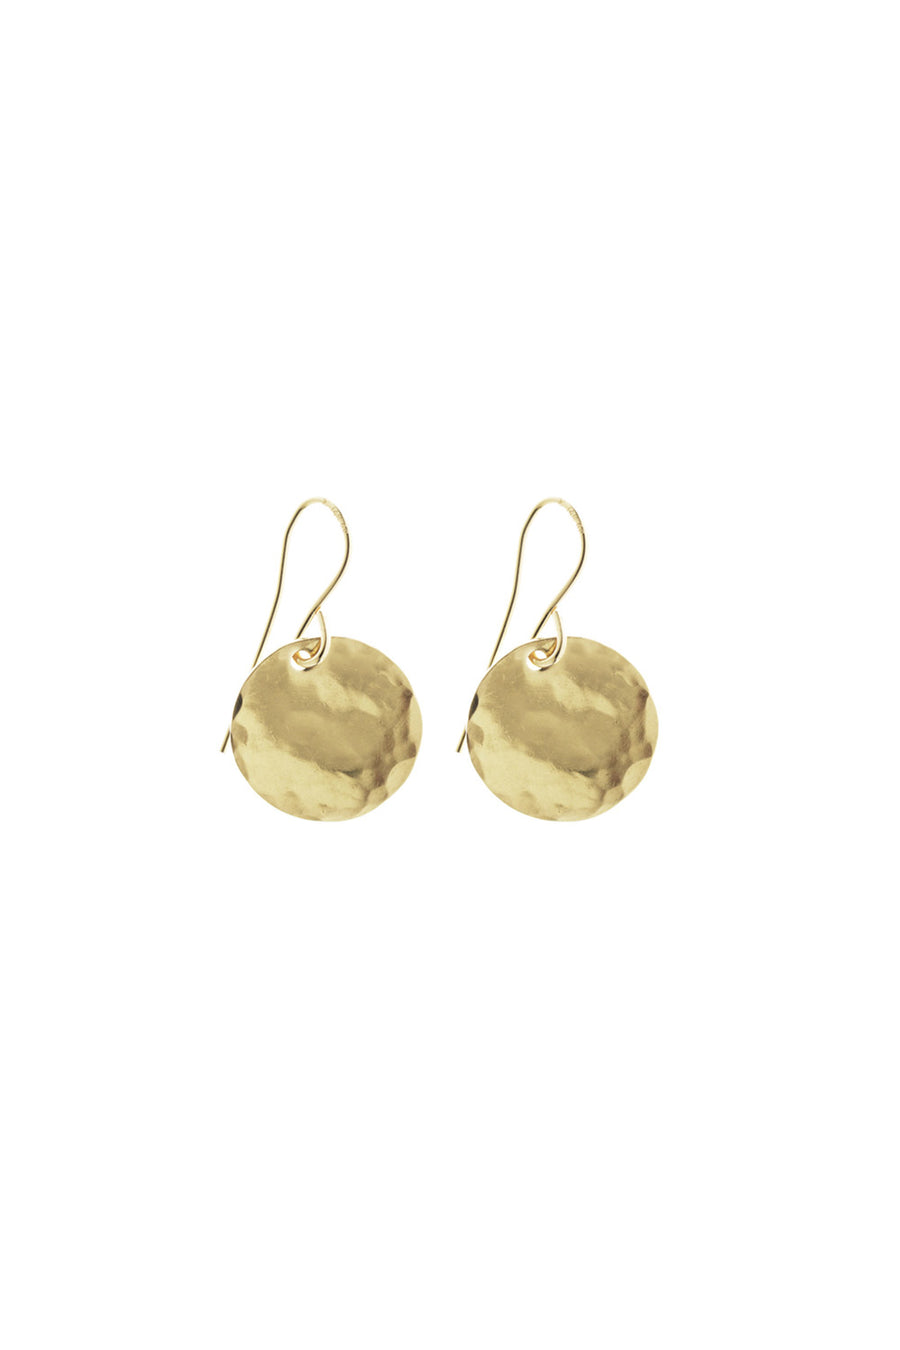 CLASSIC HAMMERED DISK EARRING GOLD - CrateExpectations